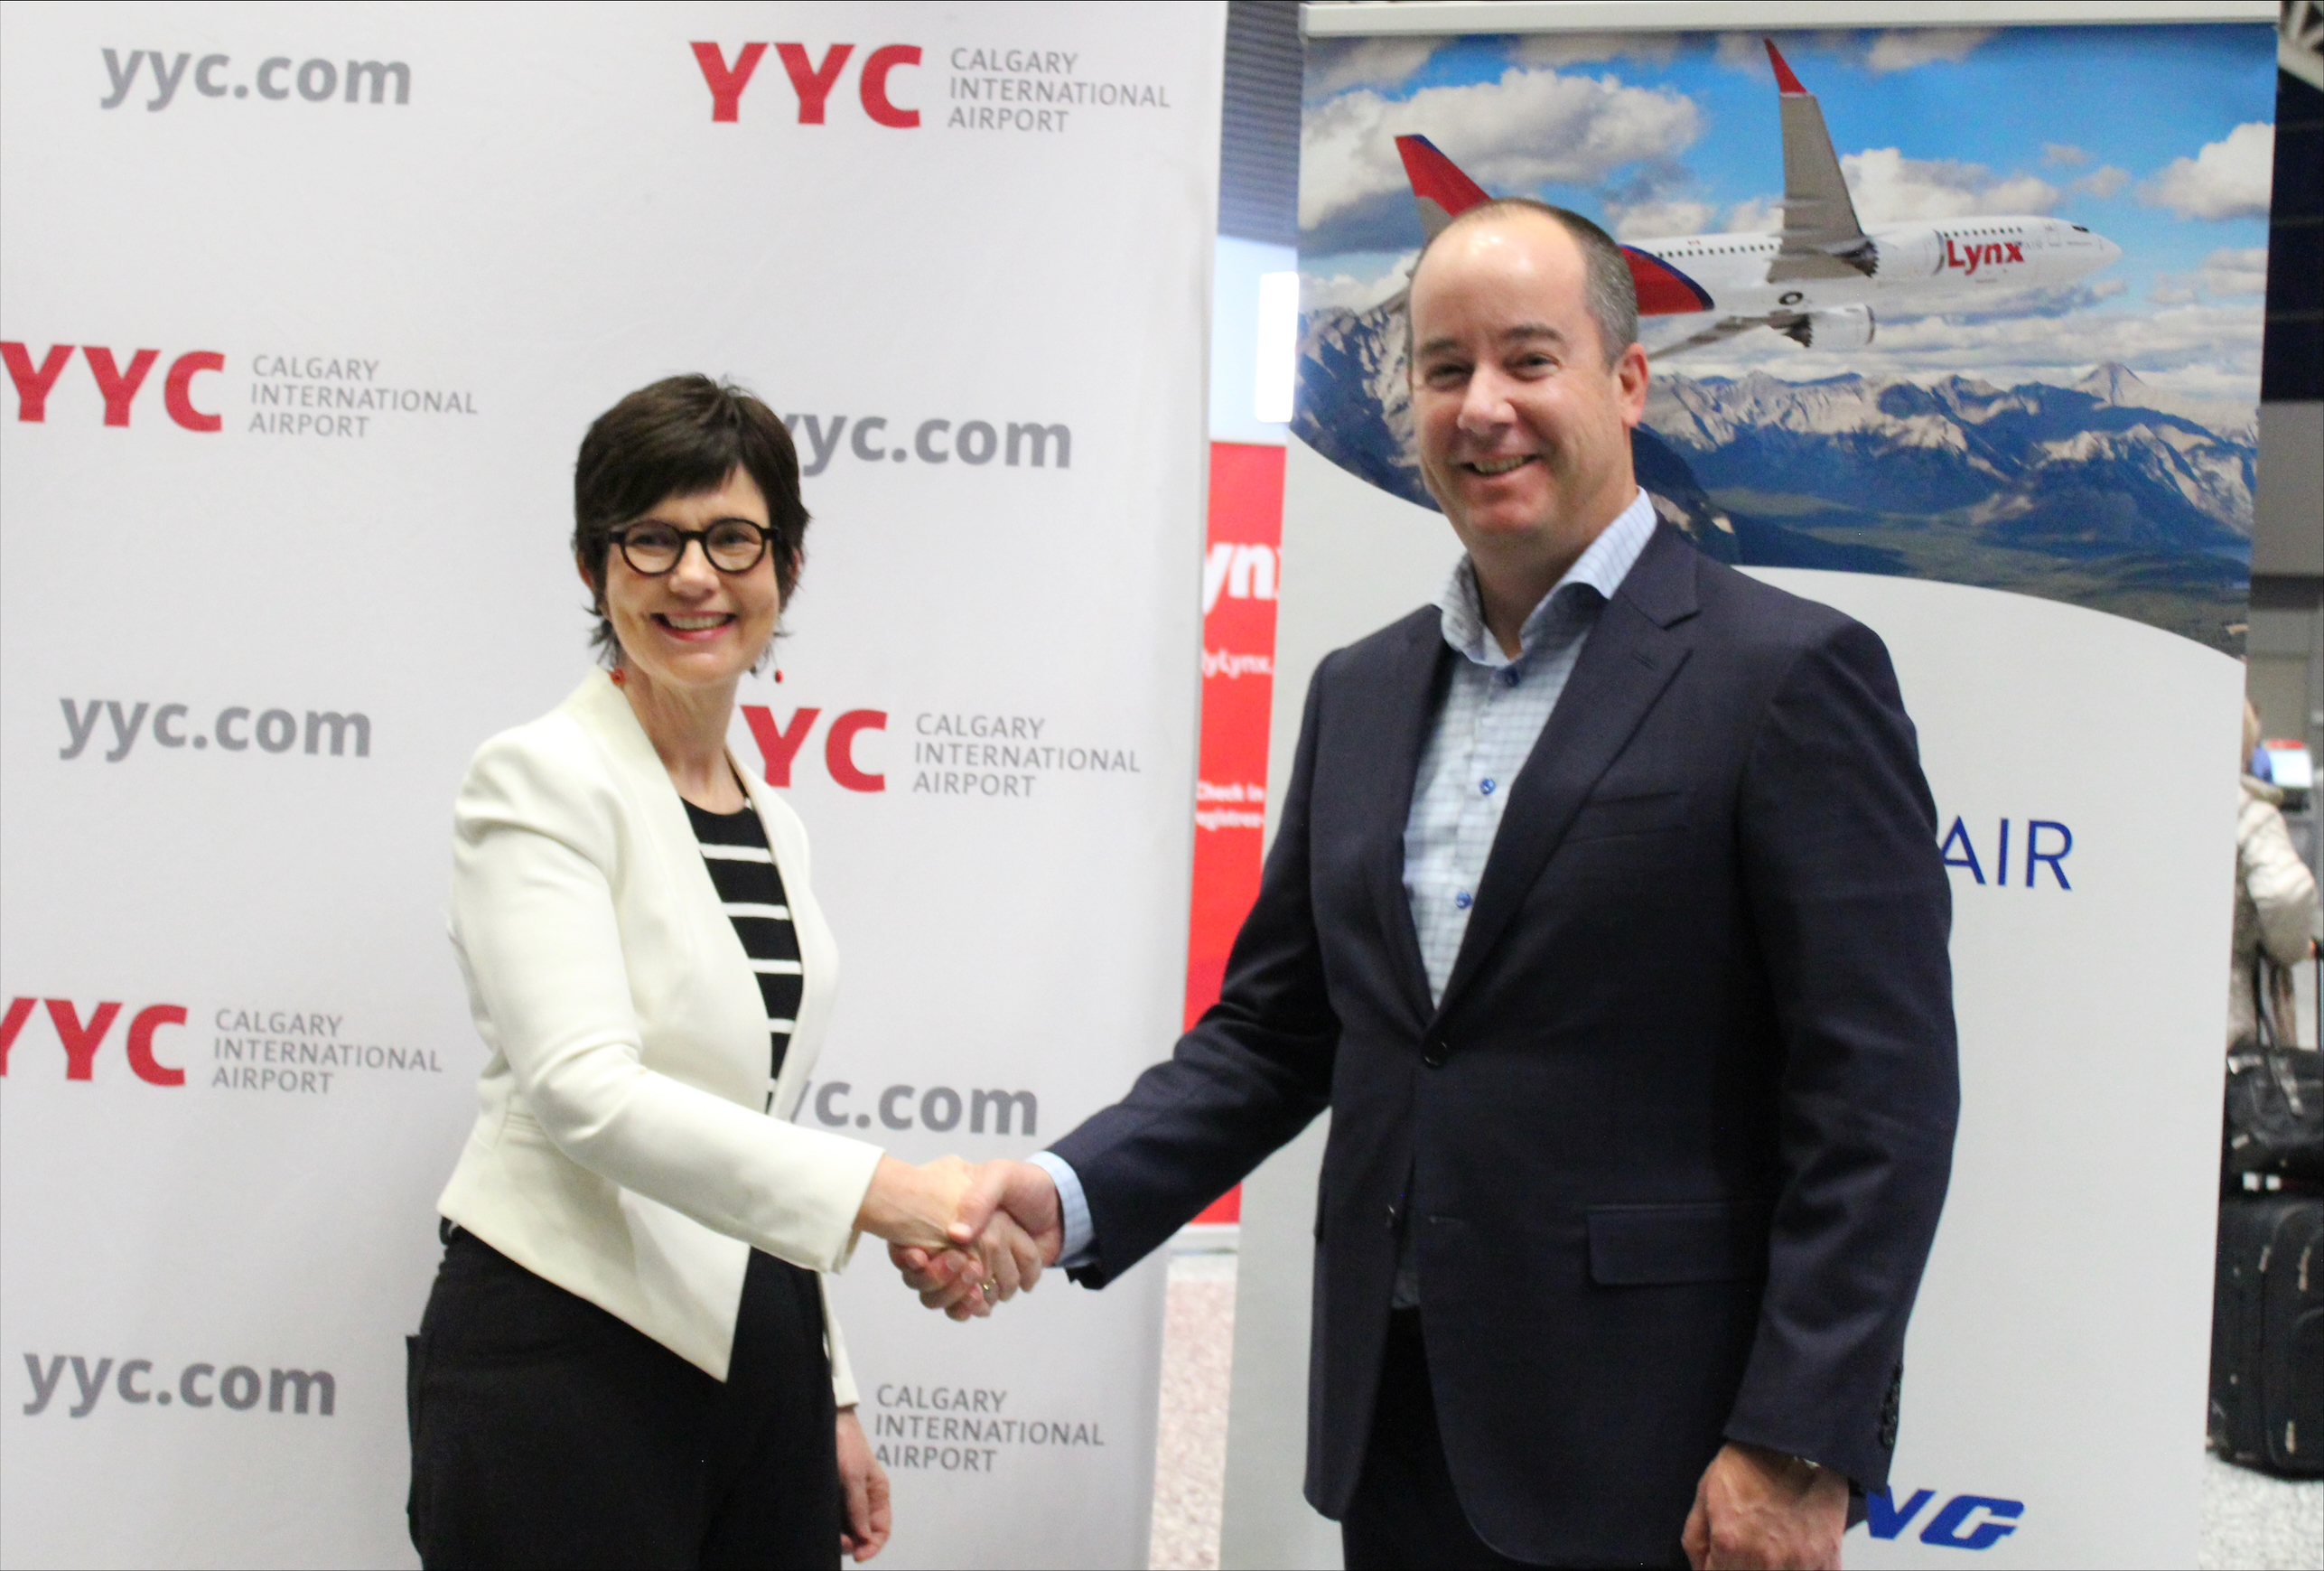 Chris Miles, Vice President, Operations & Infrastructure for The Calgary Airport Authority is joined by Lynx Air CEO, Merren McArthur, to celebrate the inaugural U.S. Lynx Air flight out of Calgary International Airport.